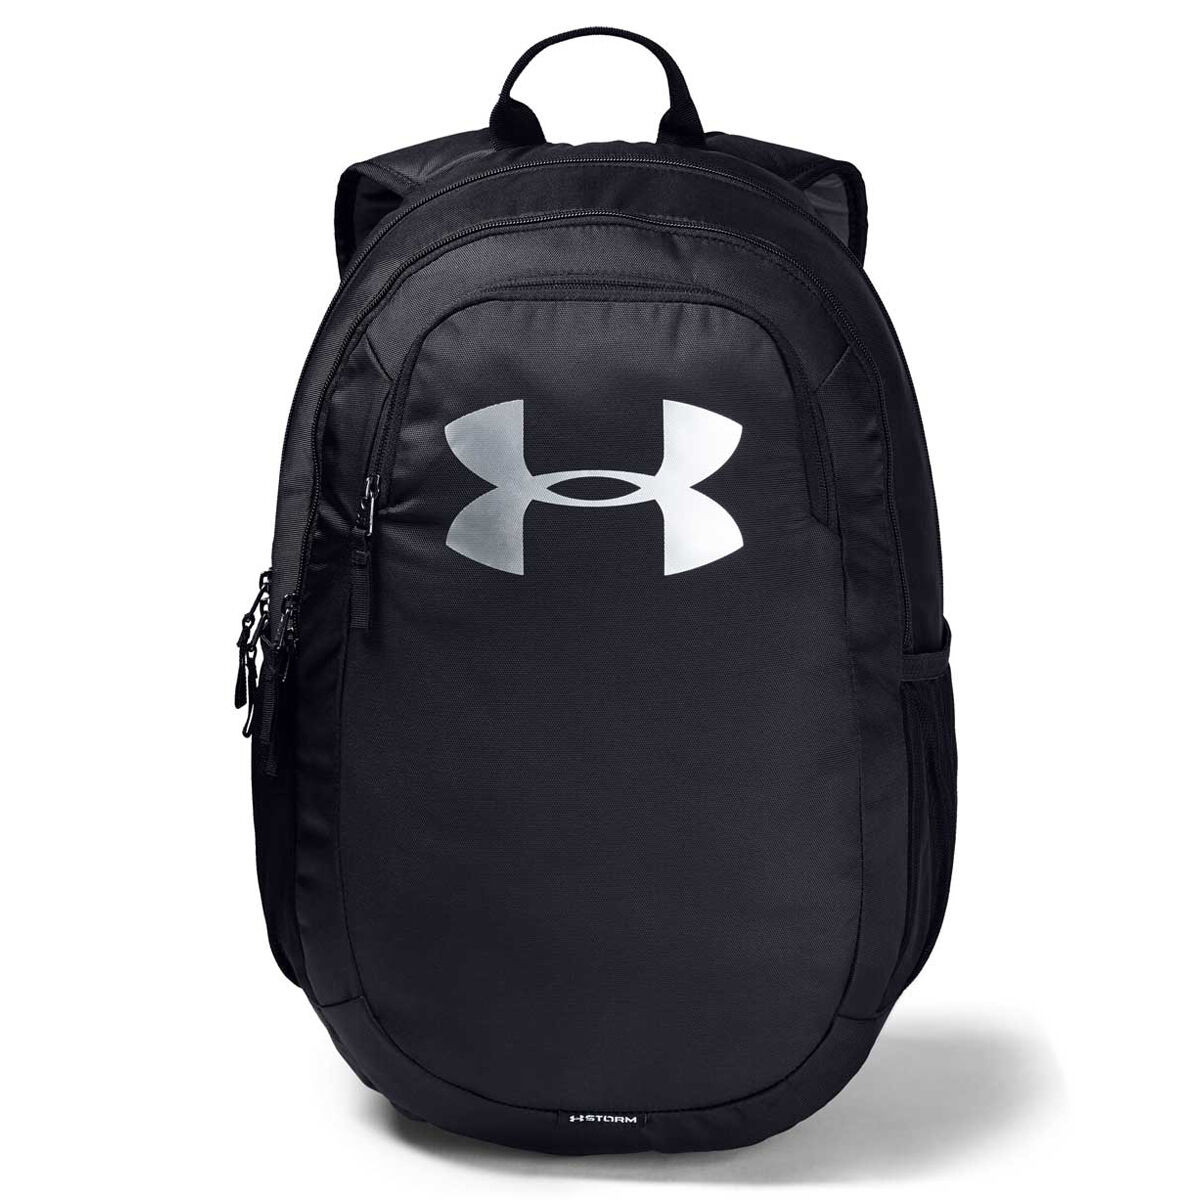 under armour backpack near me